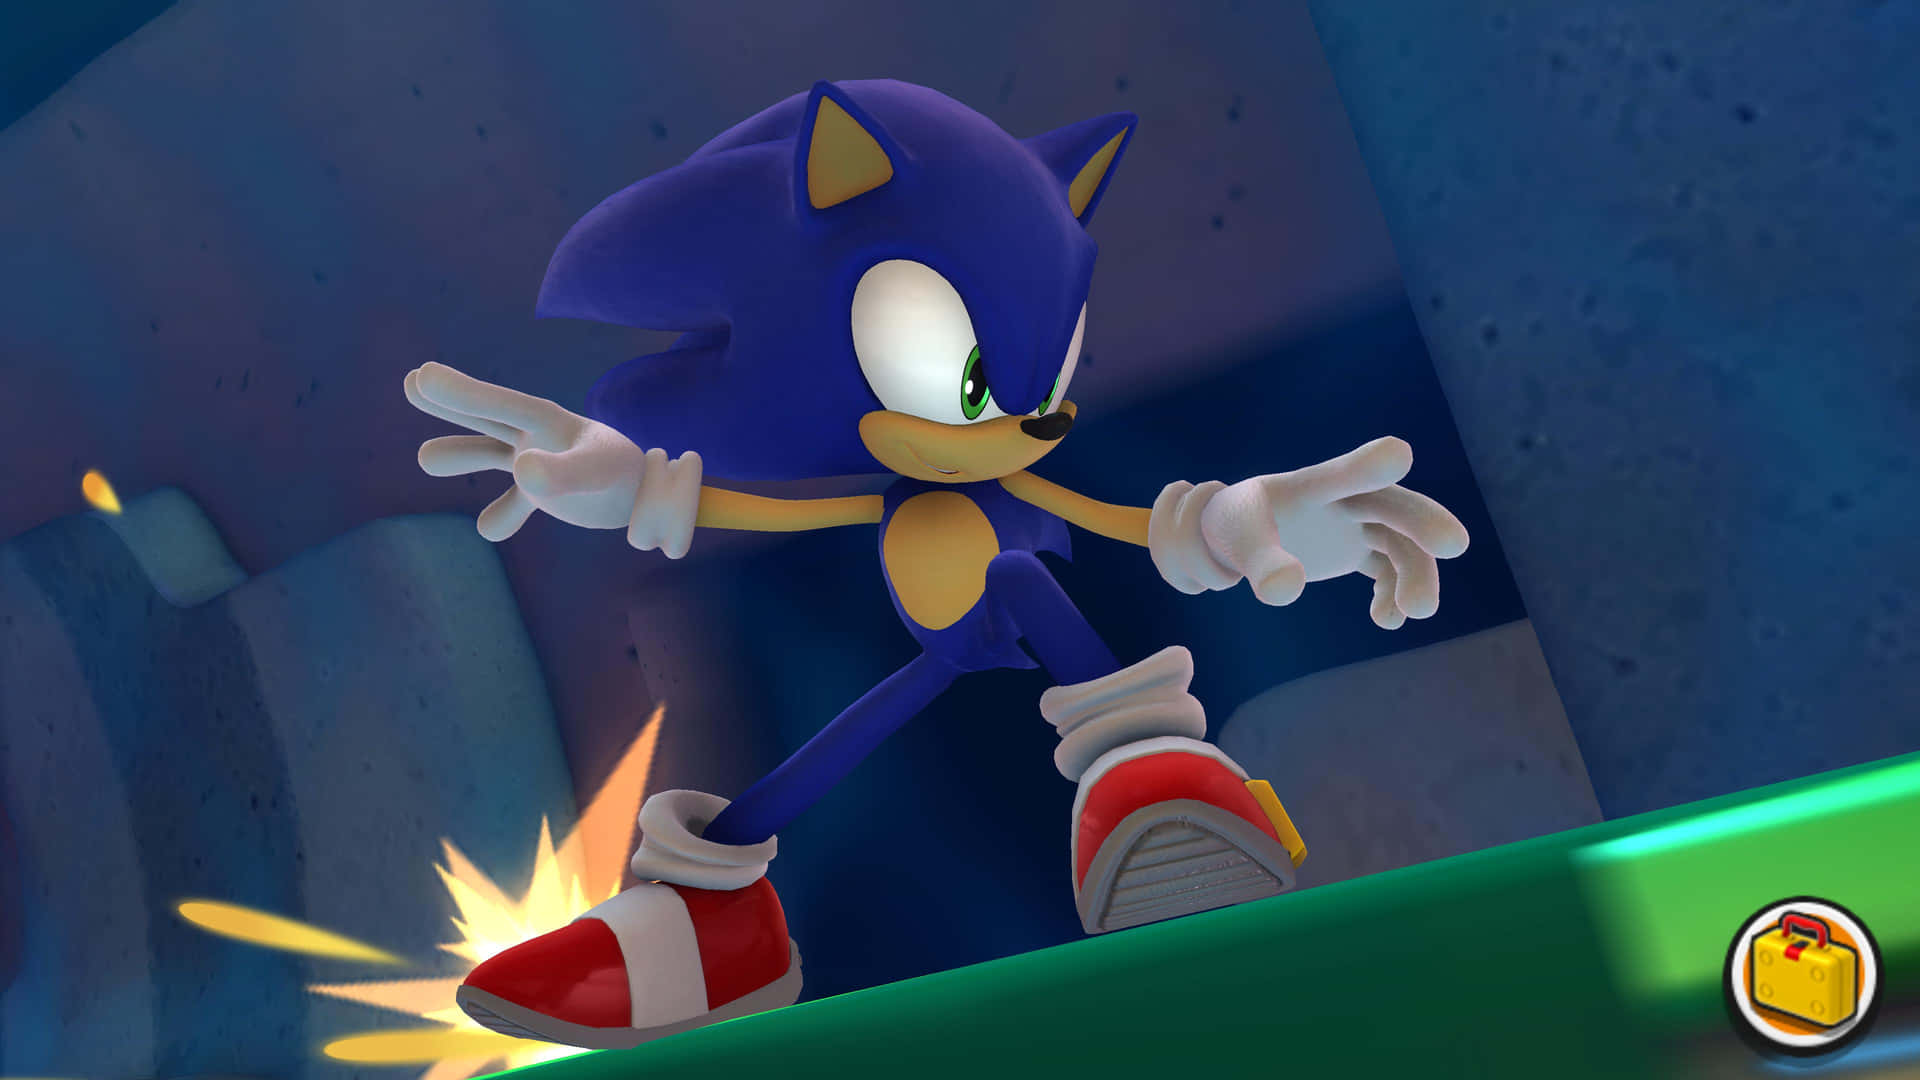 Sonic the Hedgehog in an action-packed adventure in Sonic and the Secret Rings Wallpaper